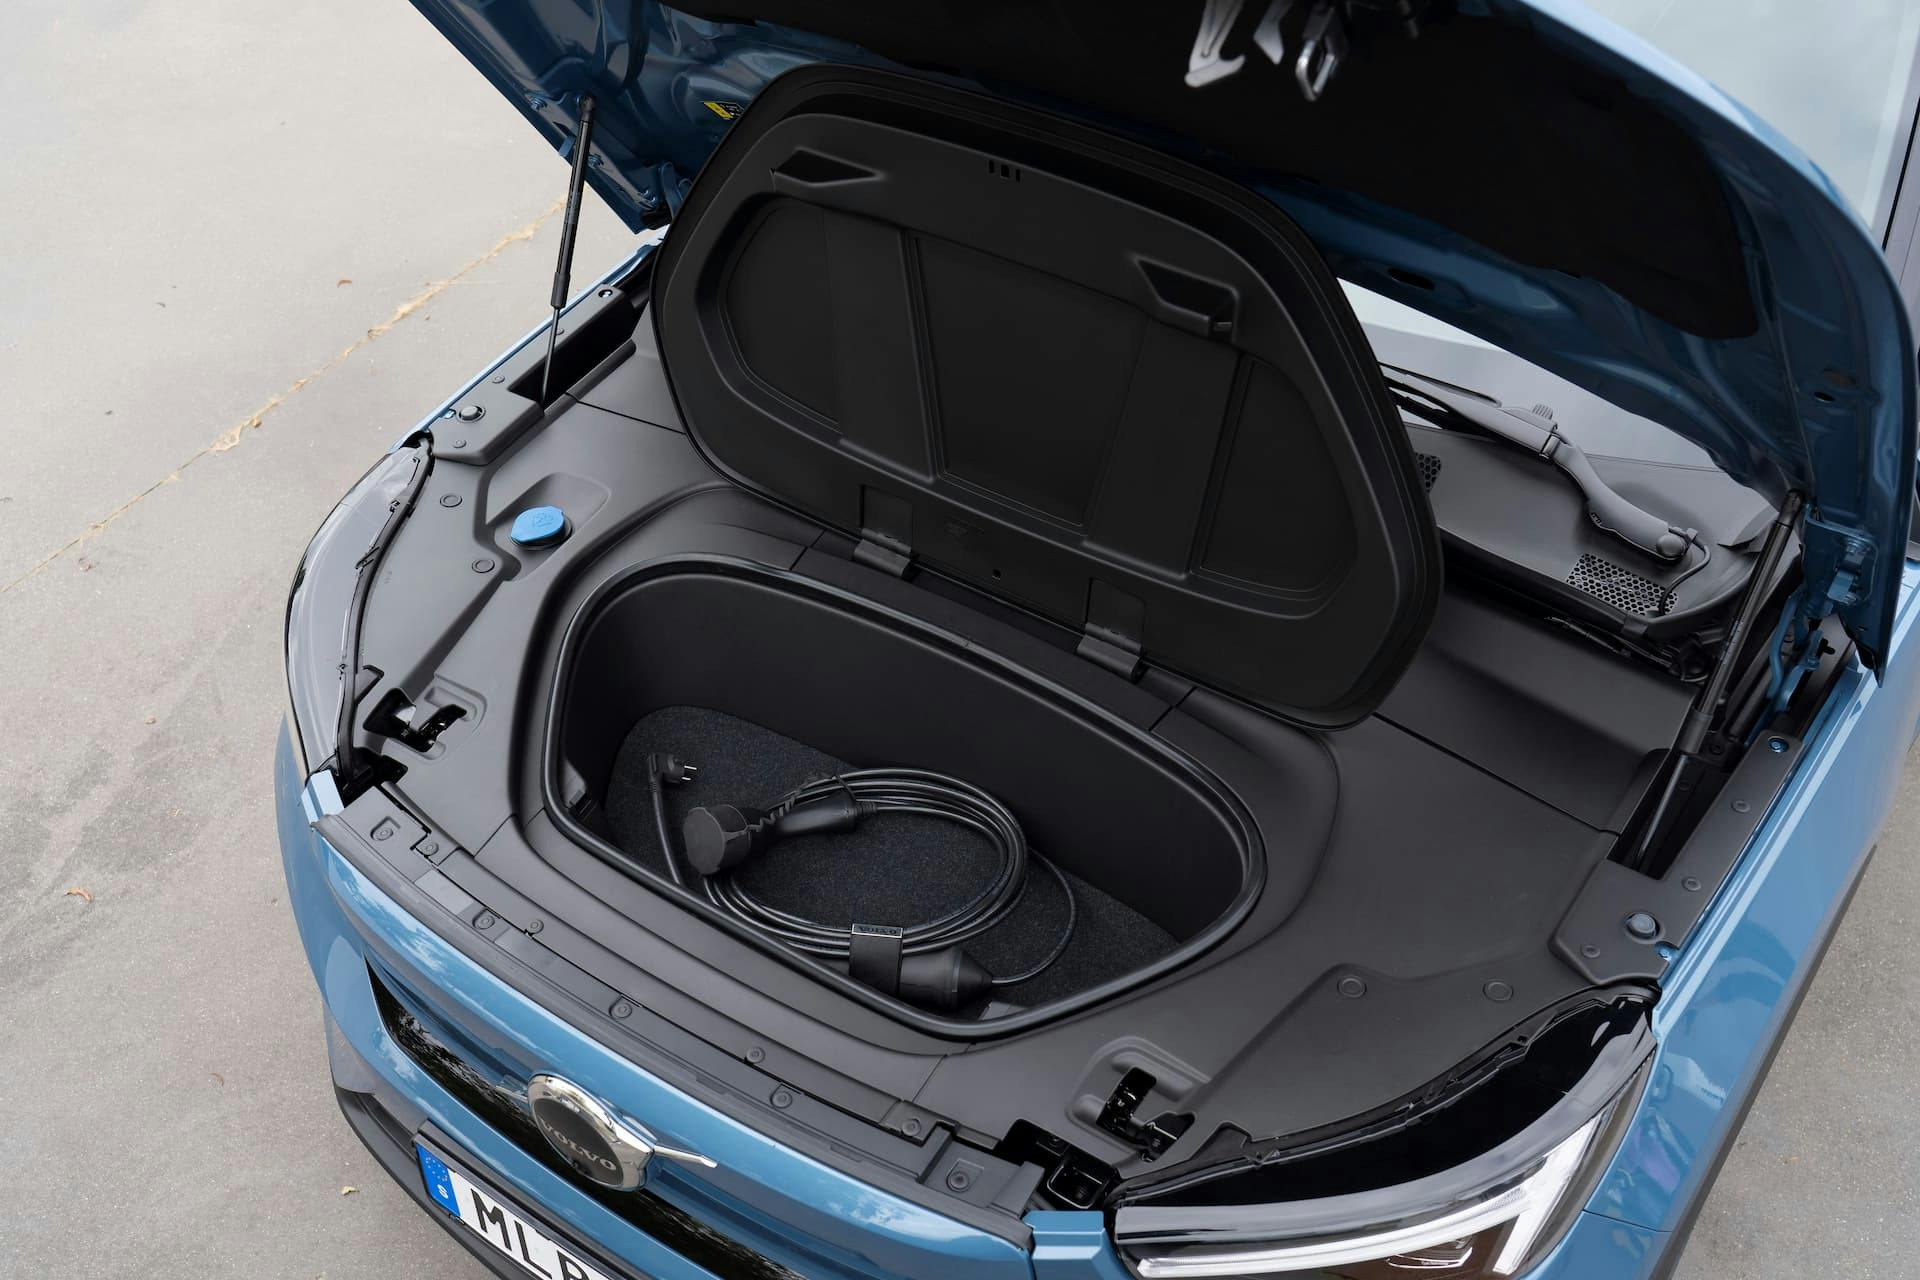 Volvo C40 frunk storage with charging cable inside